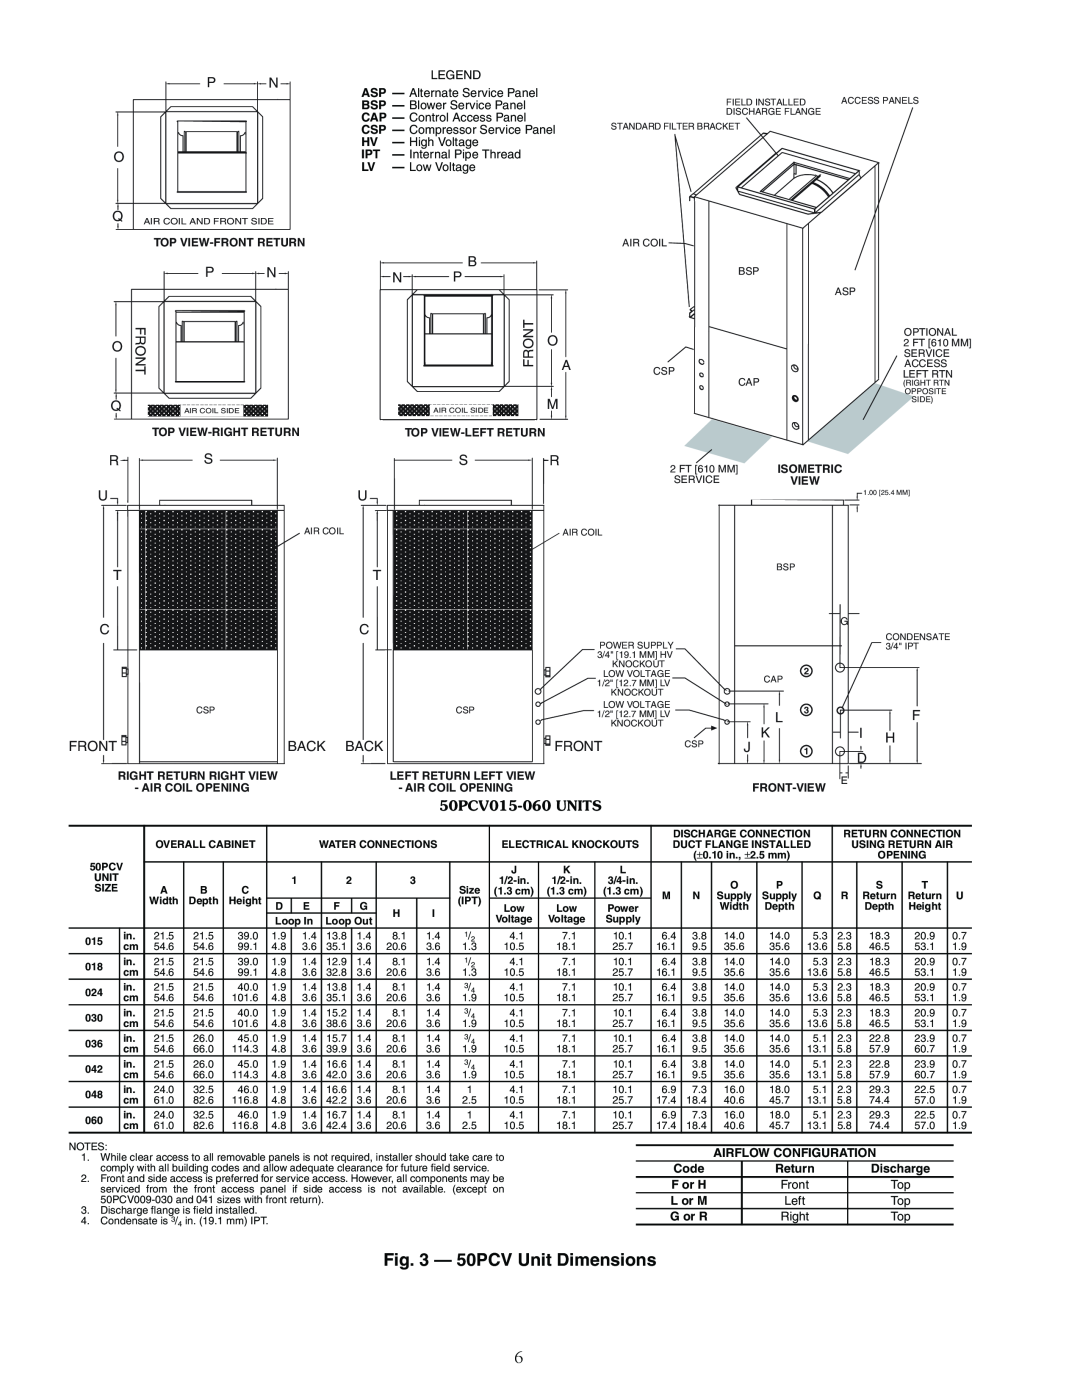 Carrier PCV015-060 specifications a50-8413, 50PCV Unit Dimensions 